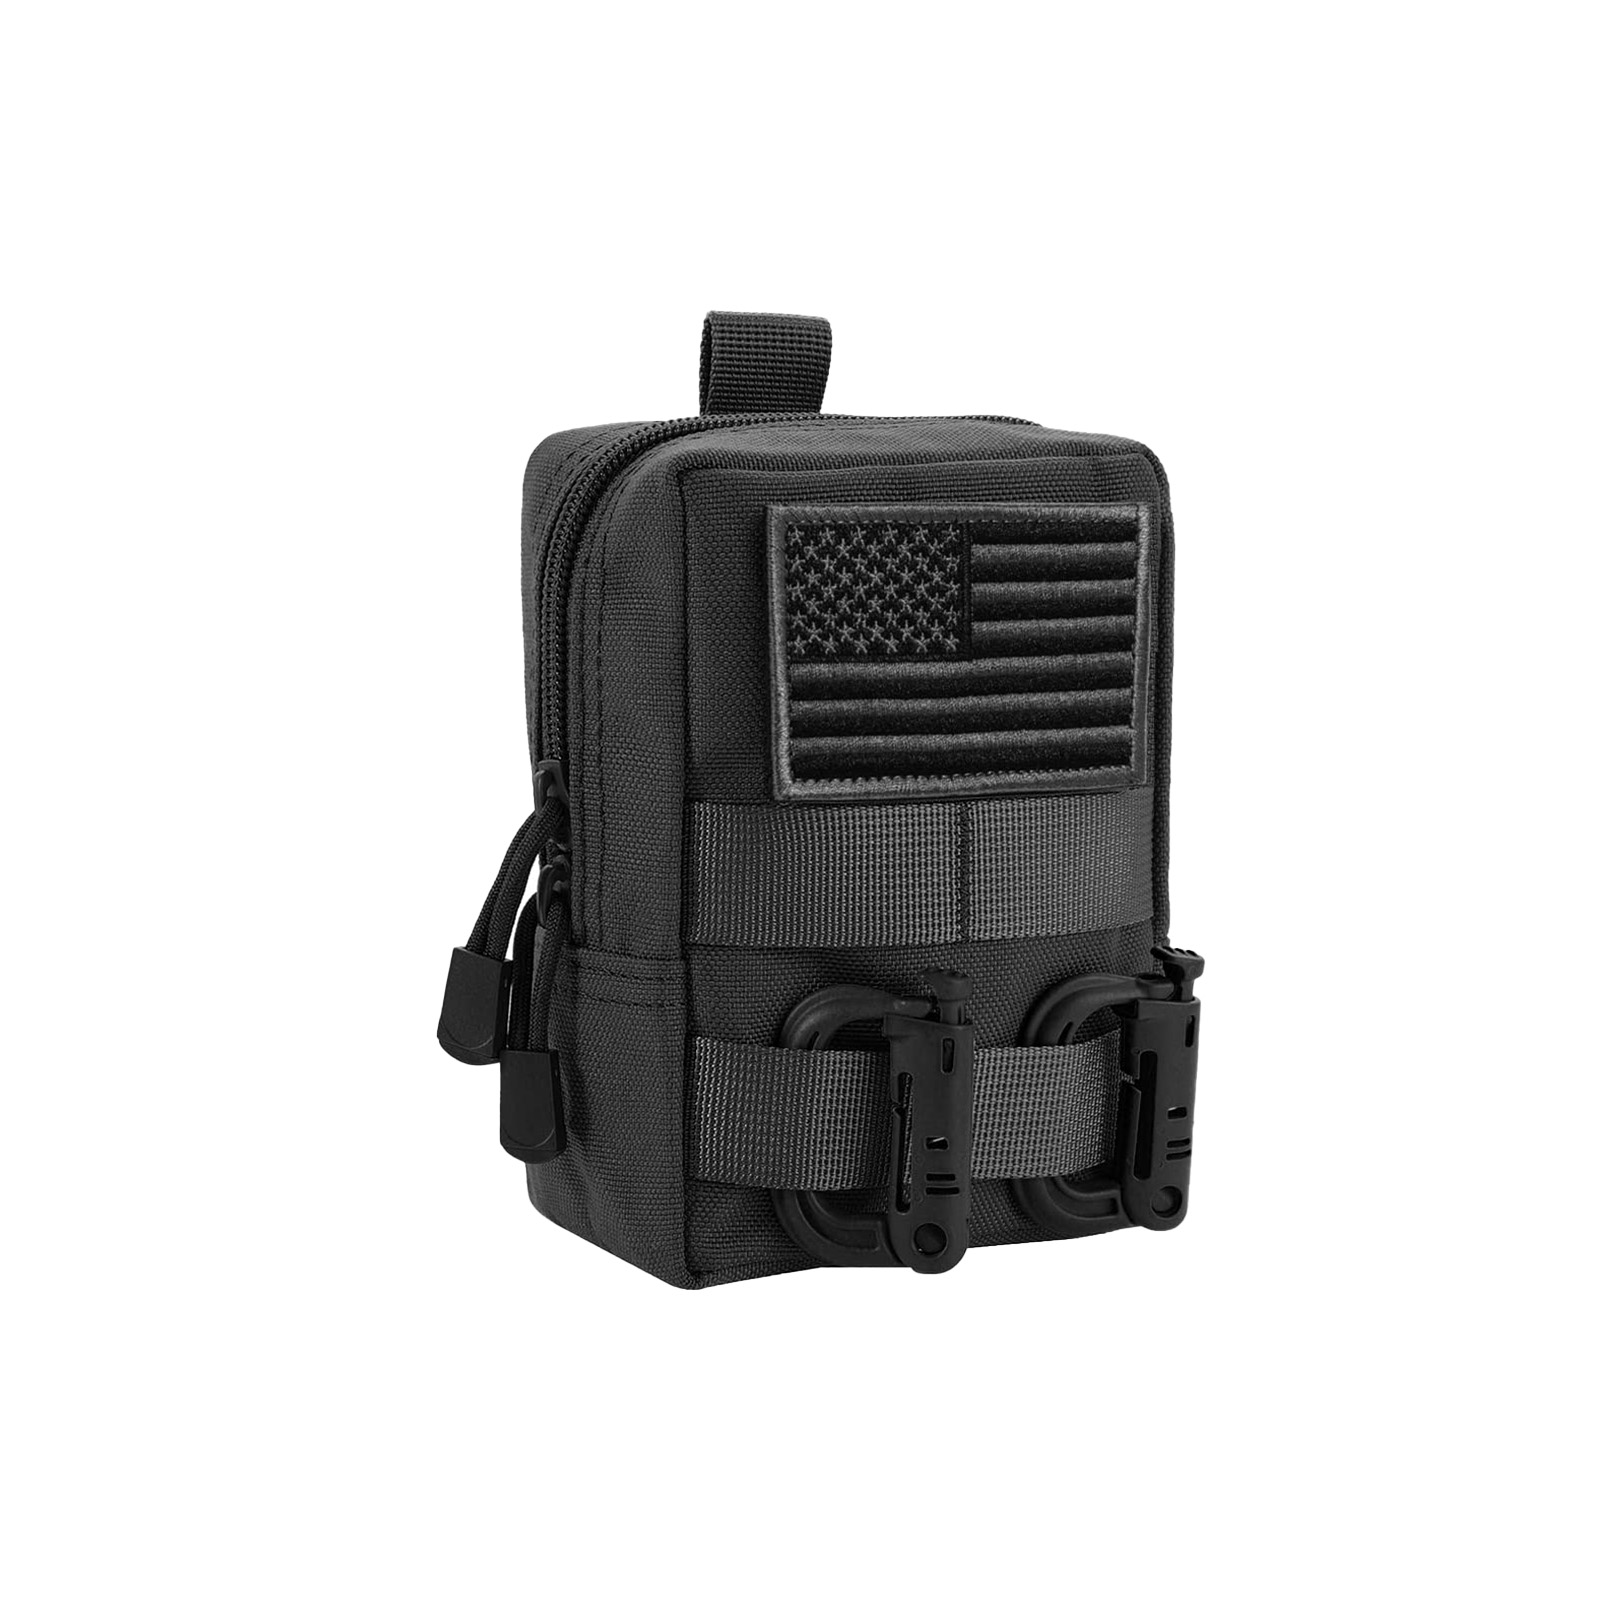  TRIWONDER Molle Pouches, Tactical Compact Water